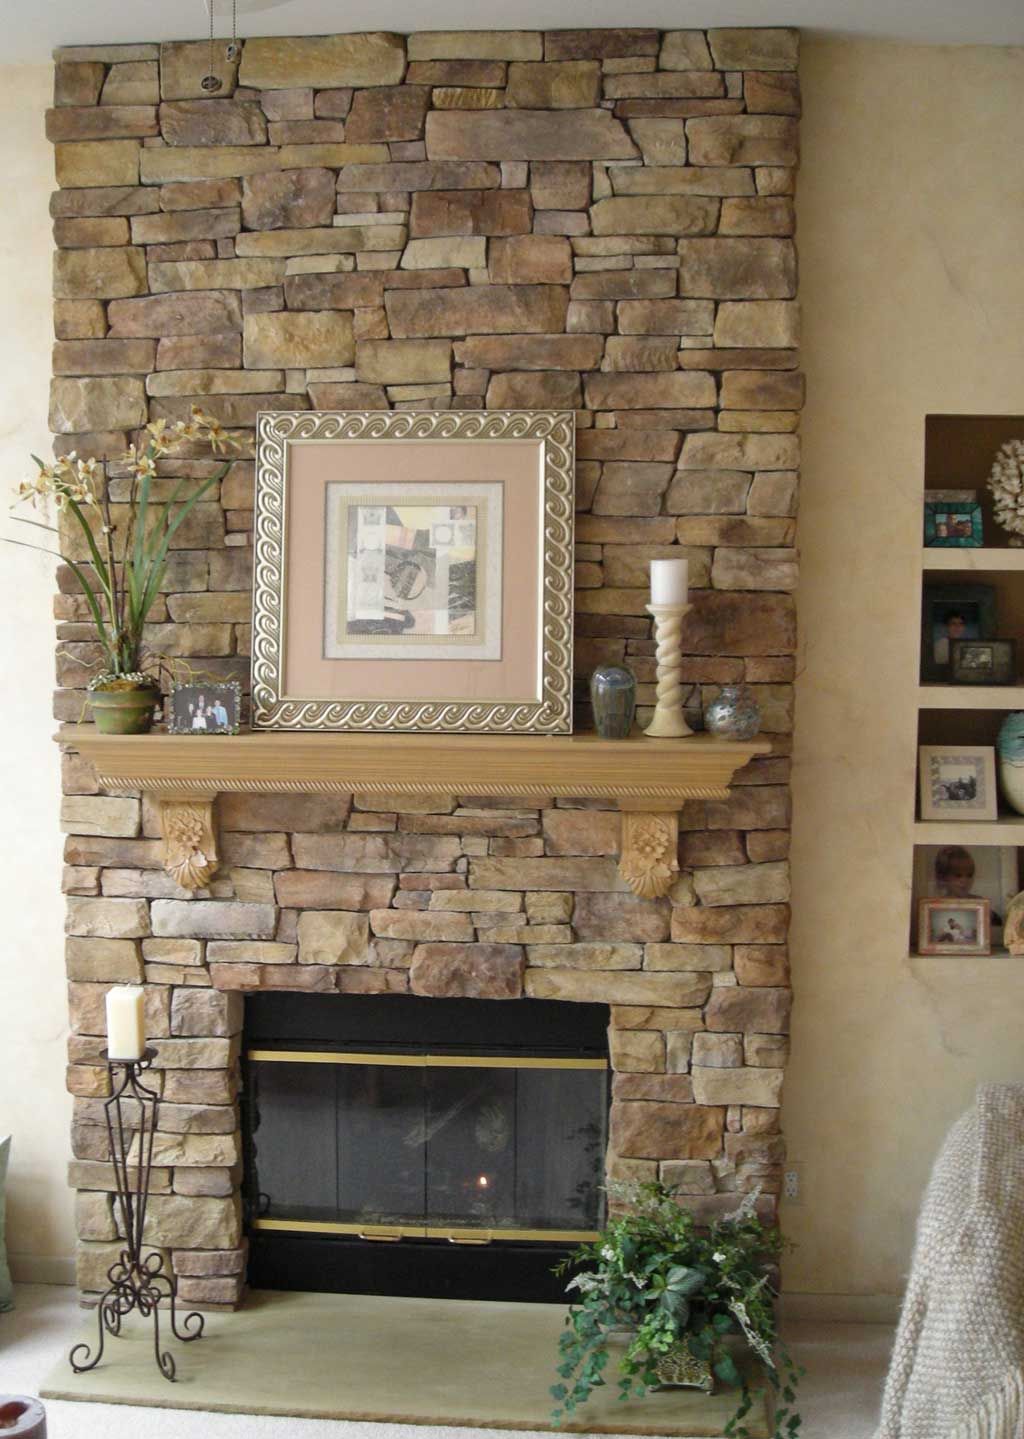 Wooden Fireplace Surround Ideas New Stone Veneer Fireplace Design Fireplace In 2019